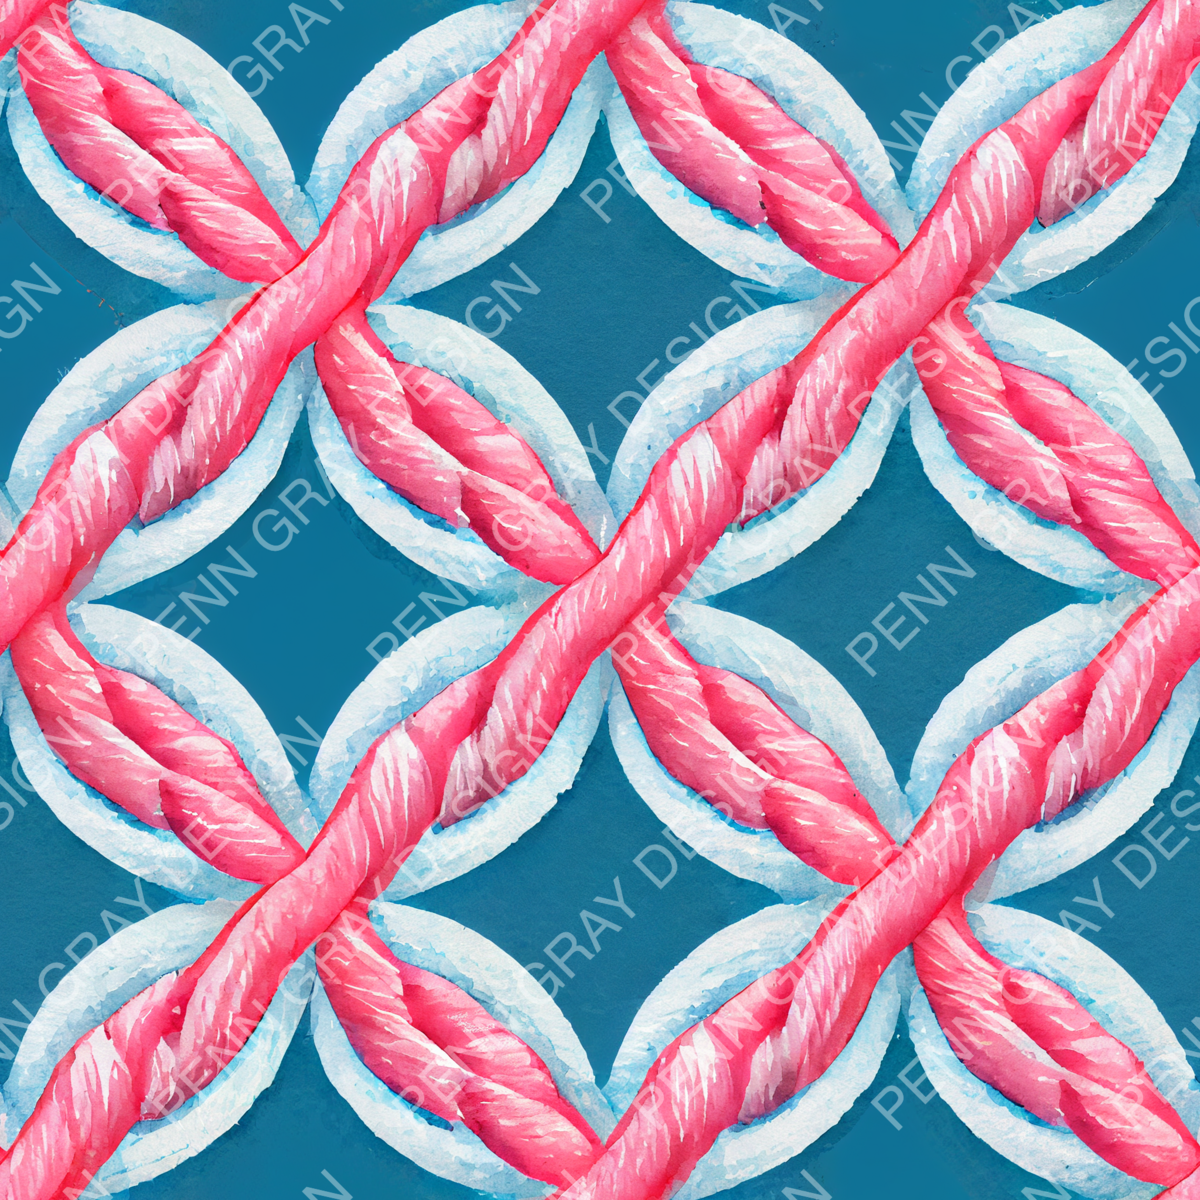 ropes-anchors-07-(watermarked)